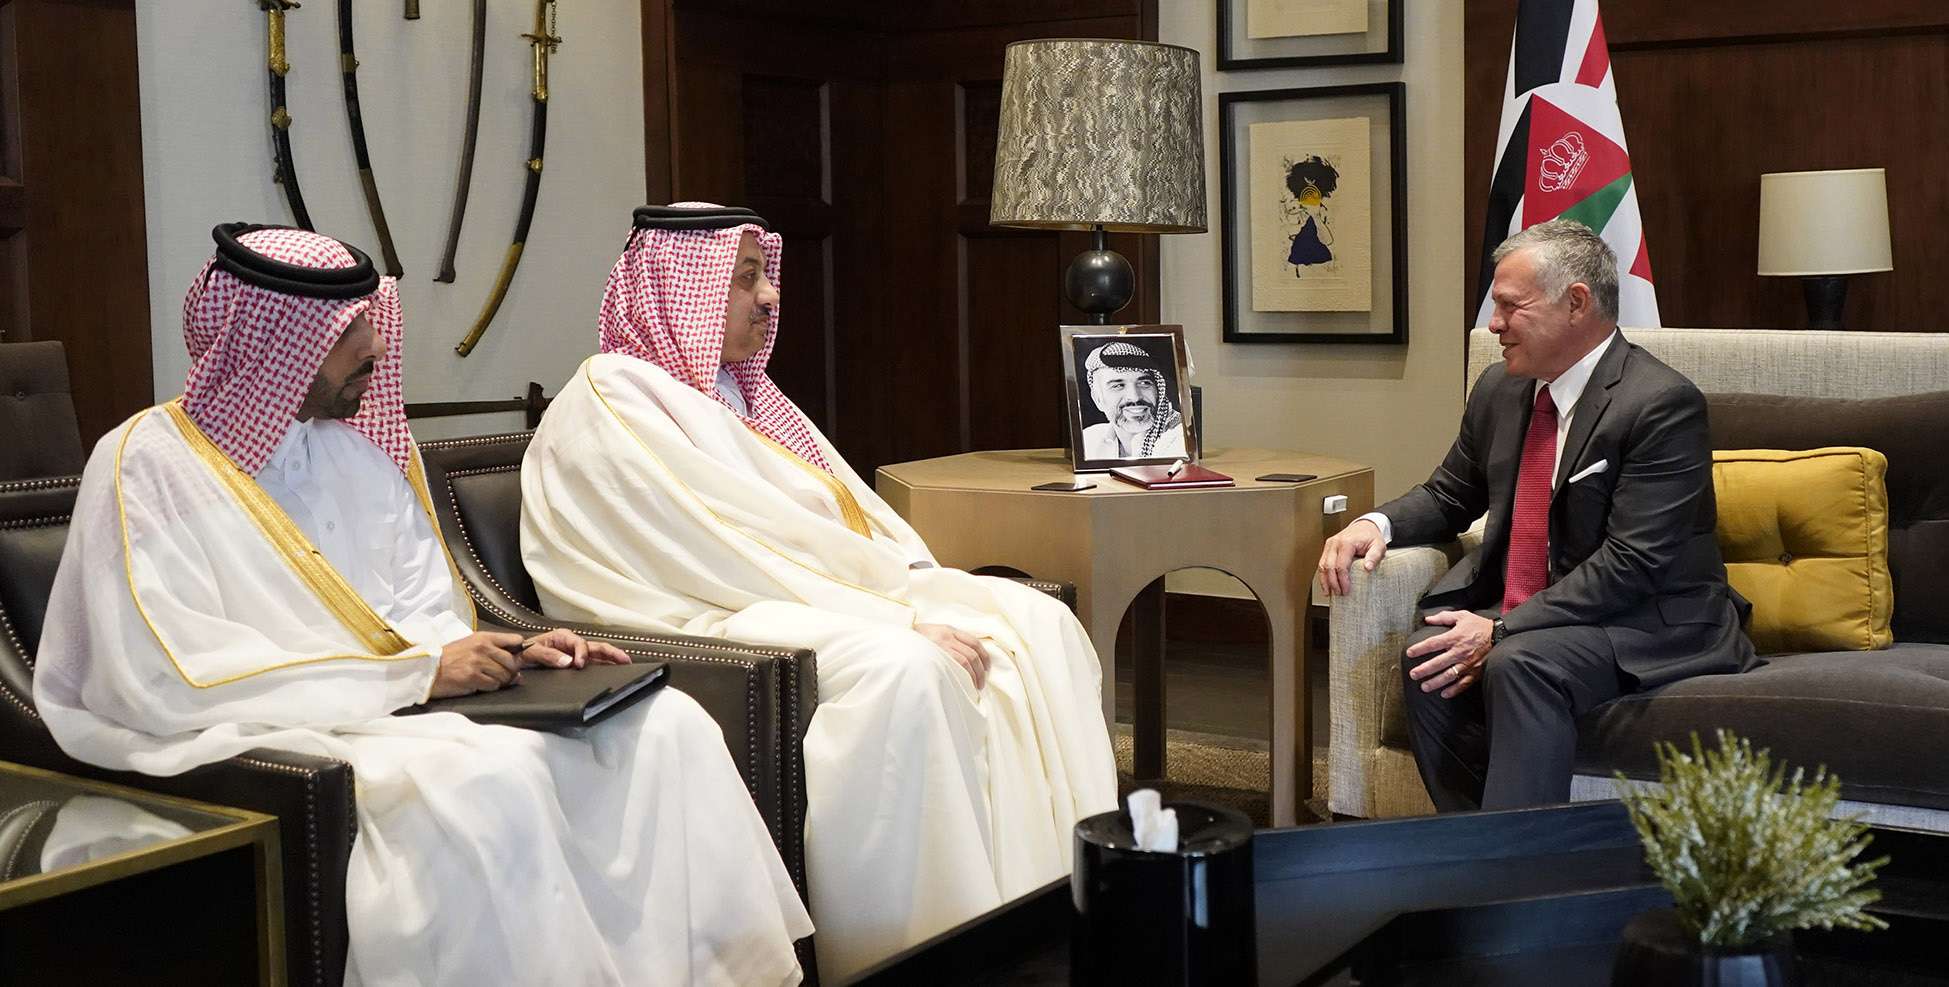 Jordanian King Abdullah II (R) receiving Qatar's Deputy Prime Minister of Qatar and Minister of State for Defence Affairs Khalid bin Mohammed Al-Attiyah (C) in the capital Amman